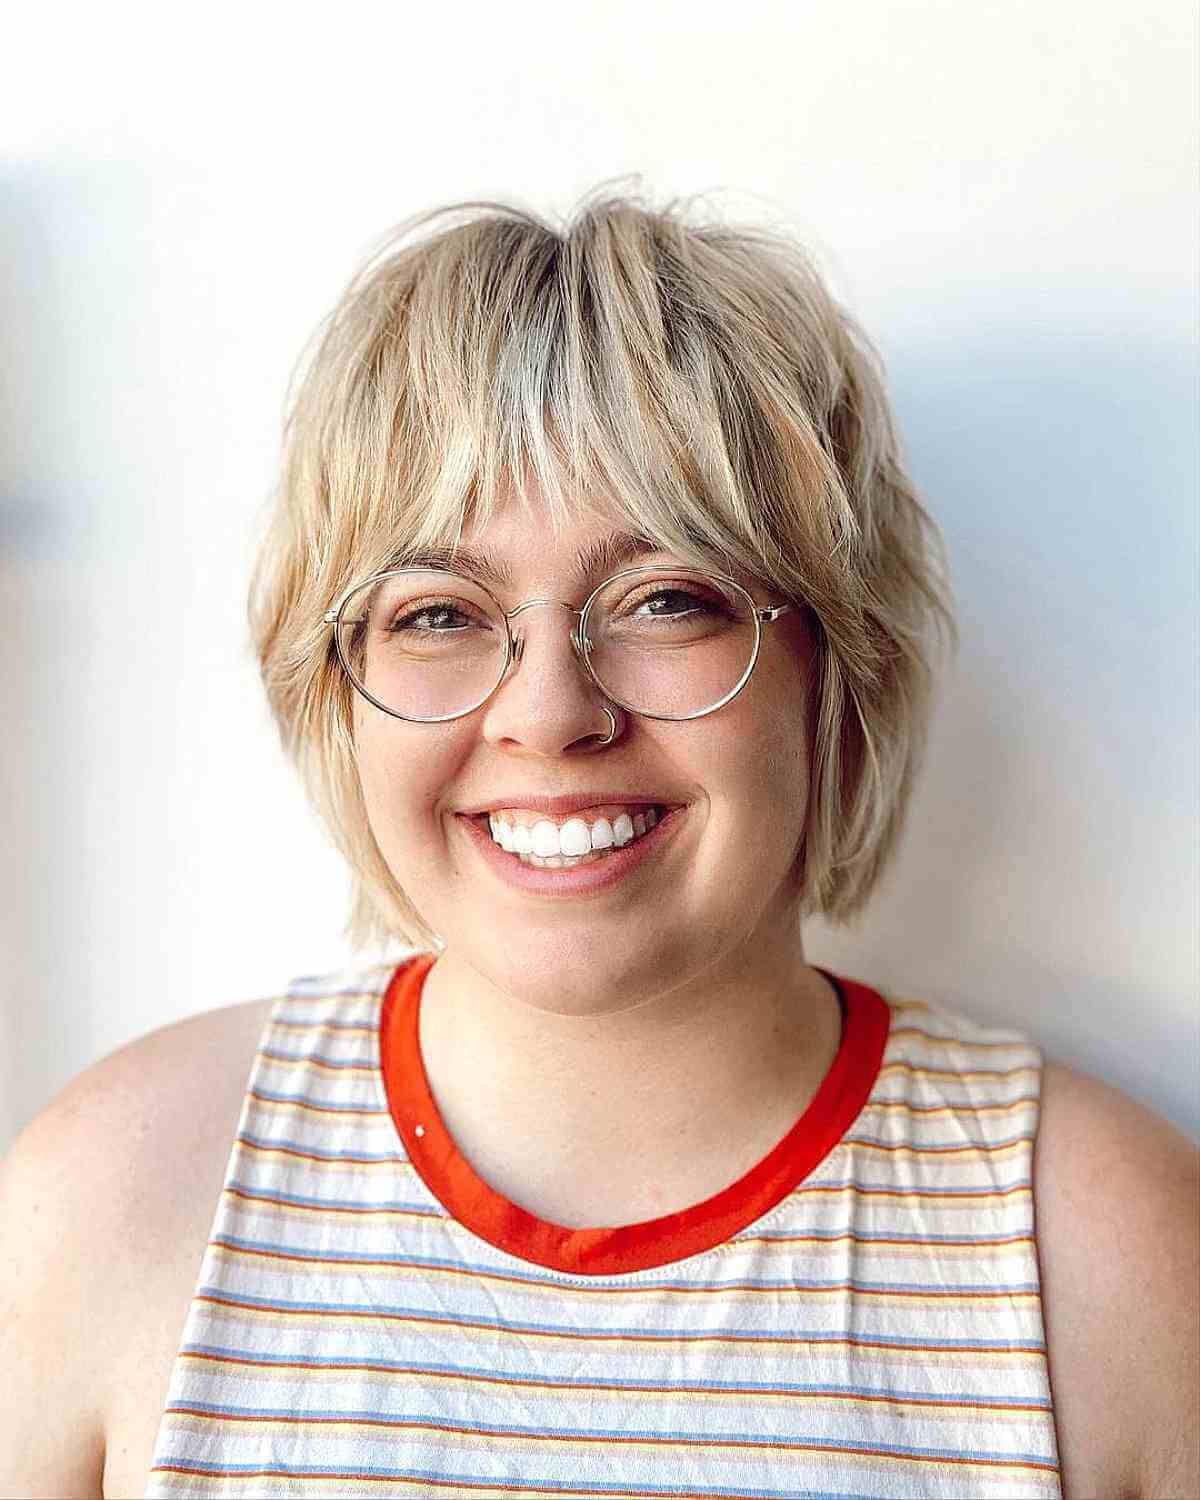 Shaggy Pixie Bob for Women with Glasses and Round Faces